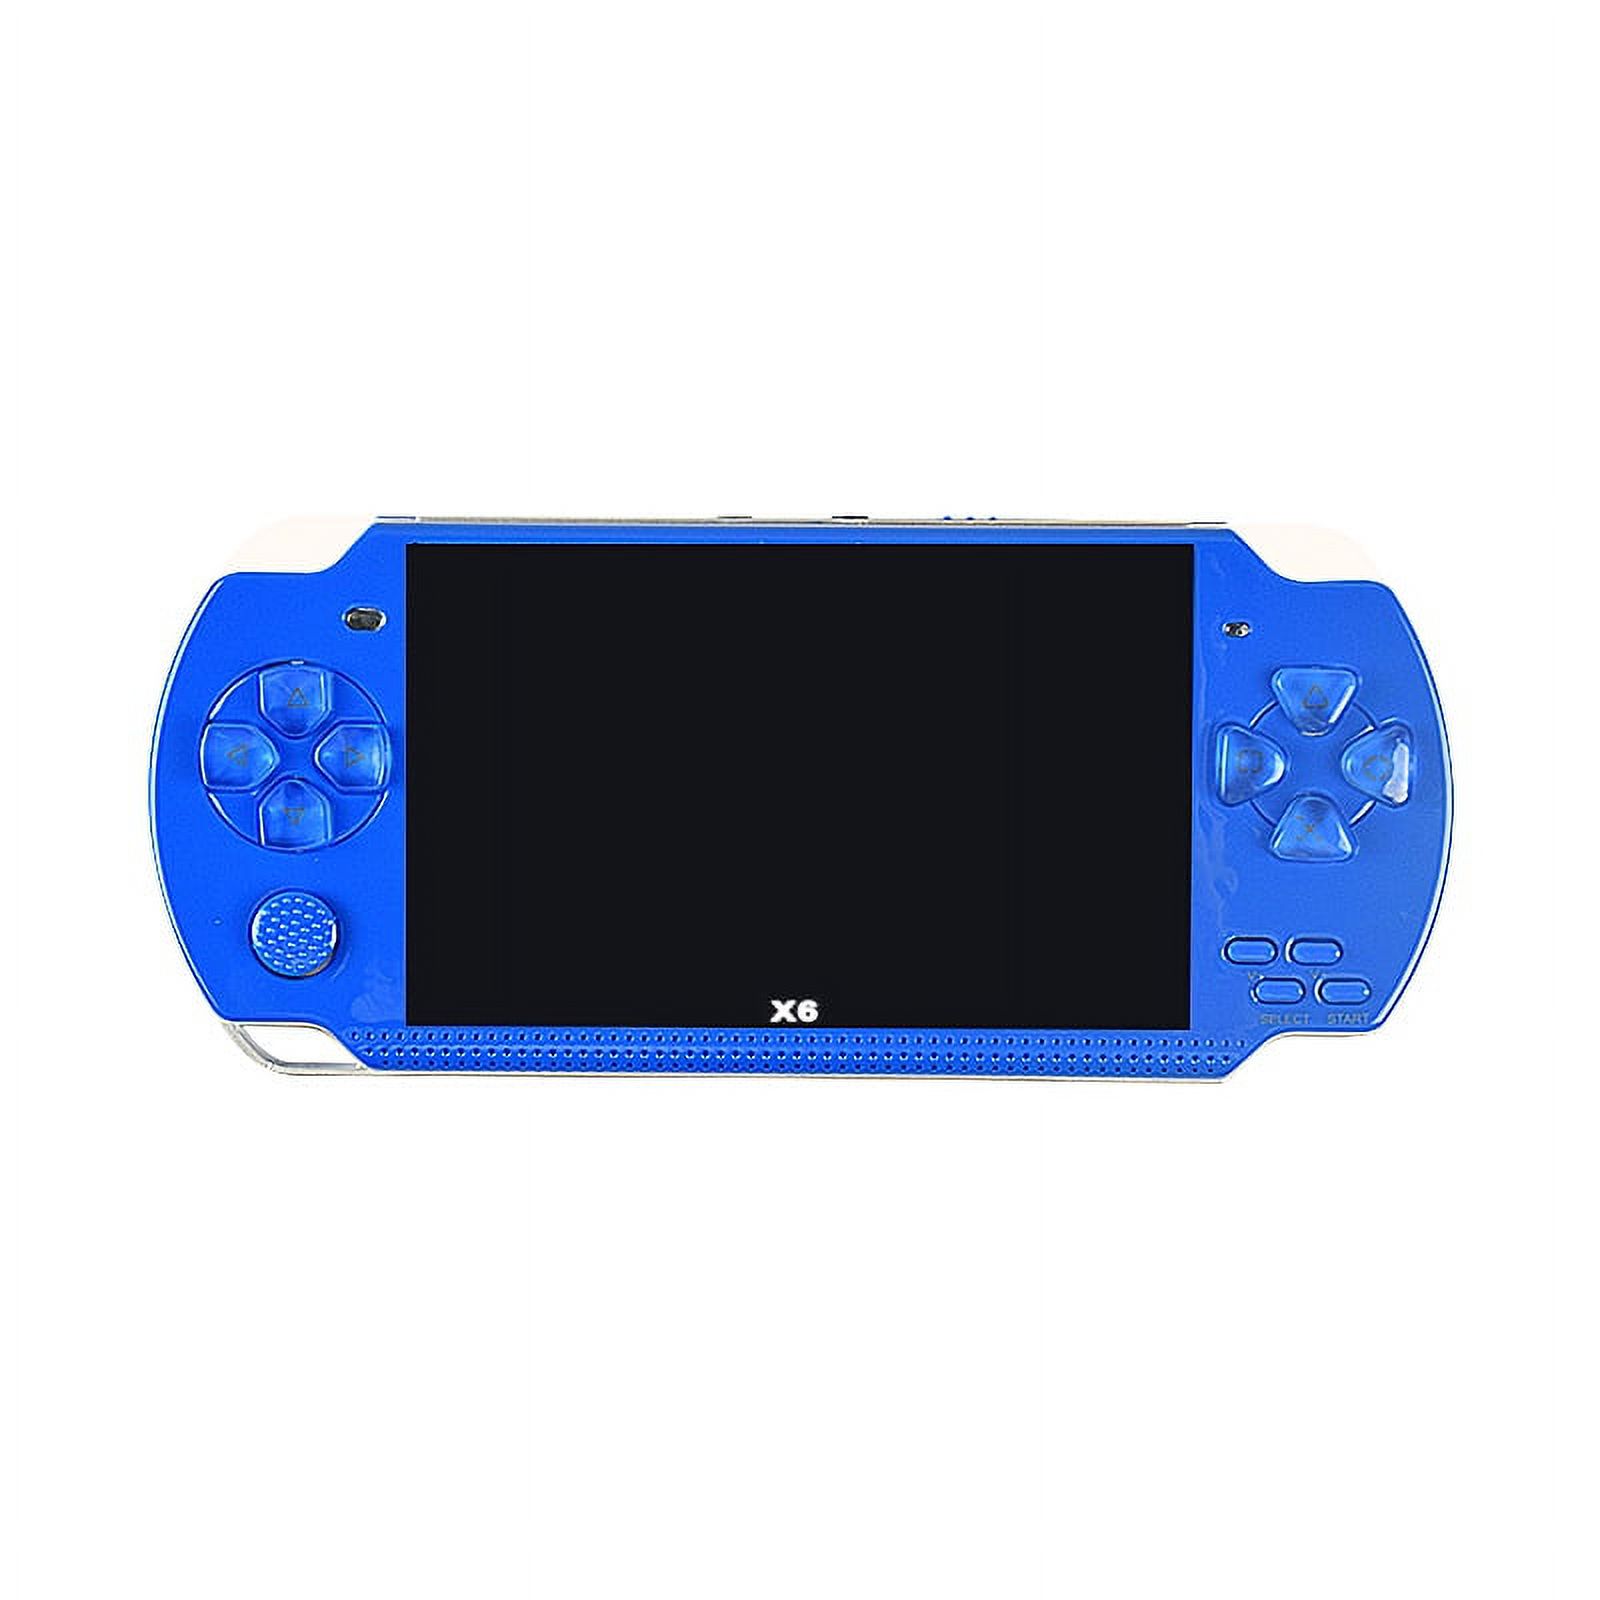 4.3 "PSP 8G ROM handheld game console player, TV output with headphones, portable handheld game console classic retro video game console with 4.1-inch HD screen - image 1 of 3